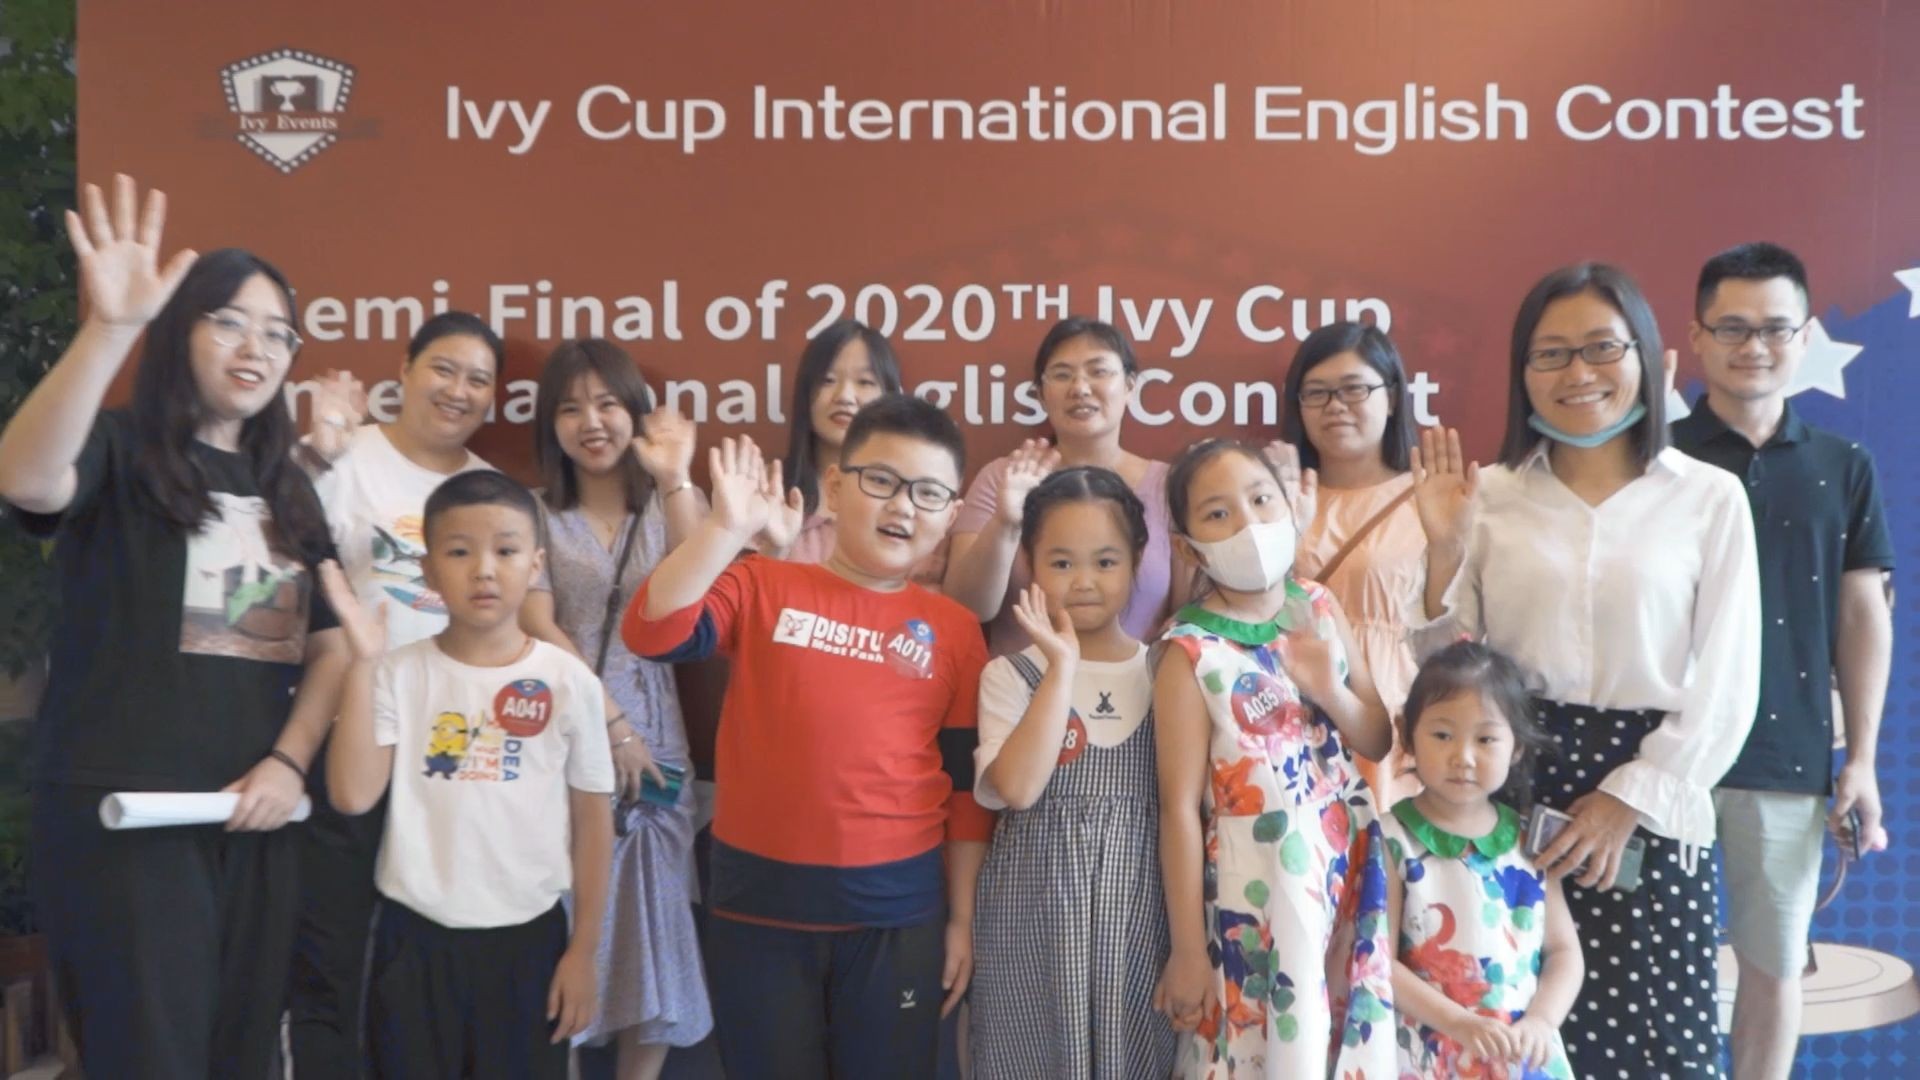 Review of the 2020 IVY CUP Semi-Finals of East China / 2020 IVY CUP 华东赛区半决选精彩回顾